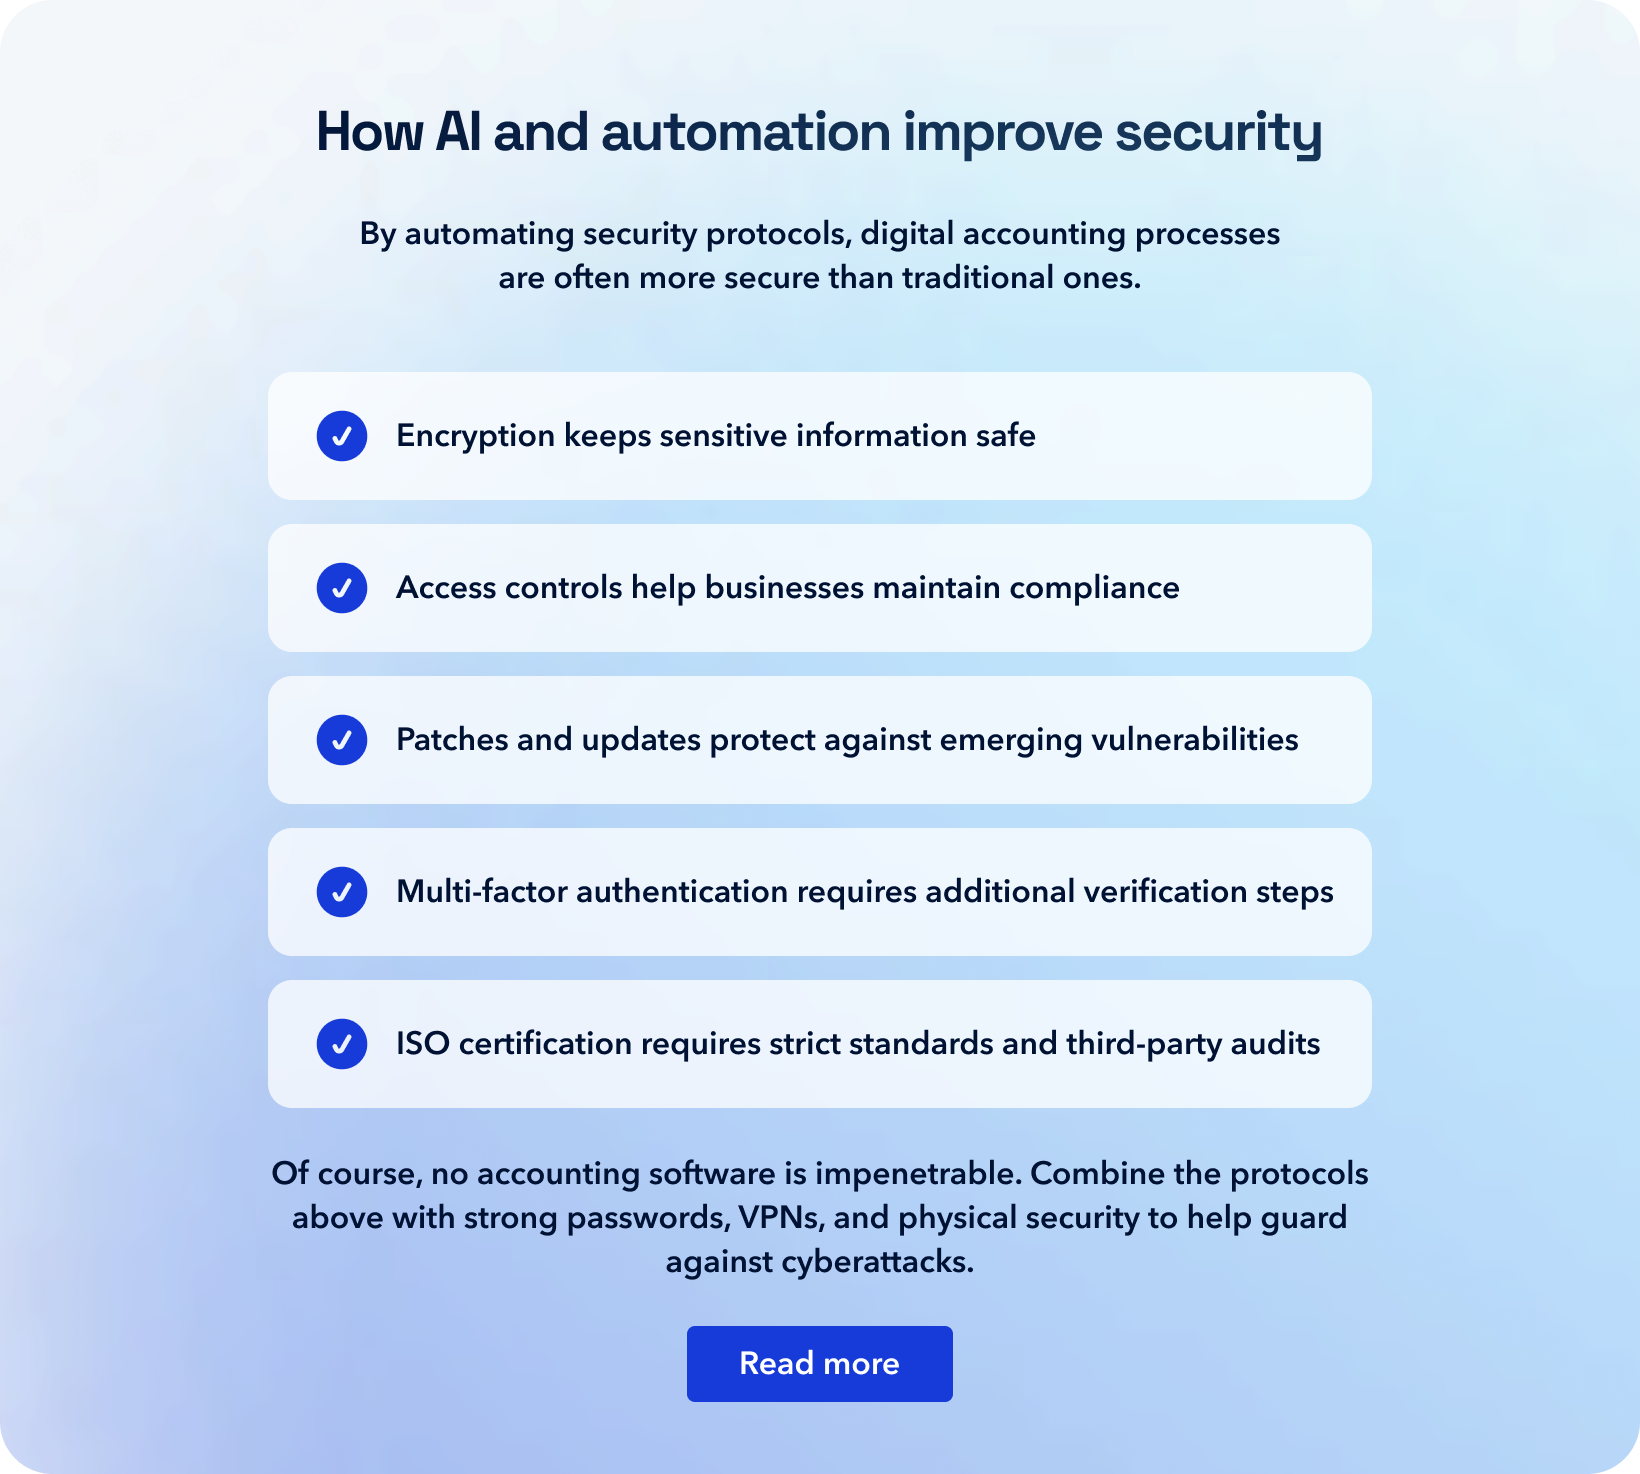 How AI and automation improve security